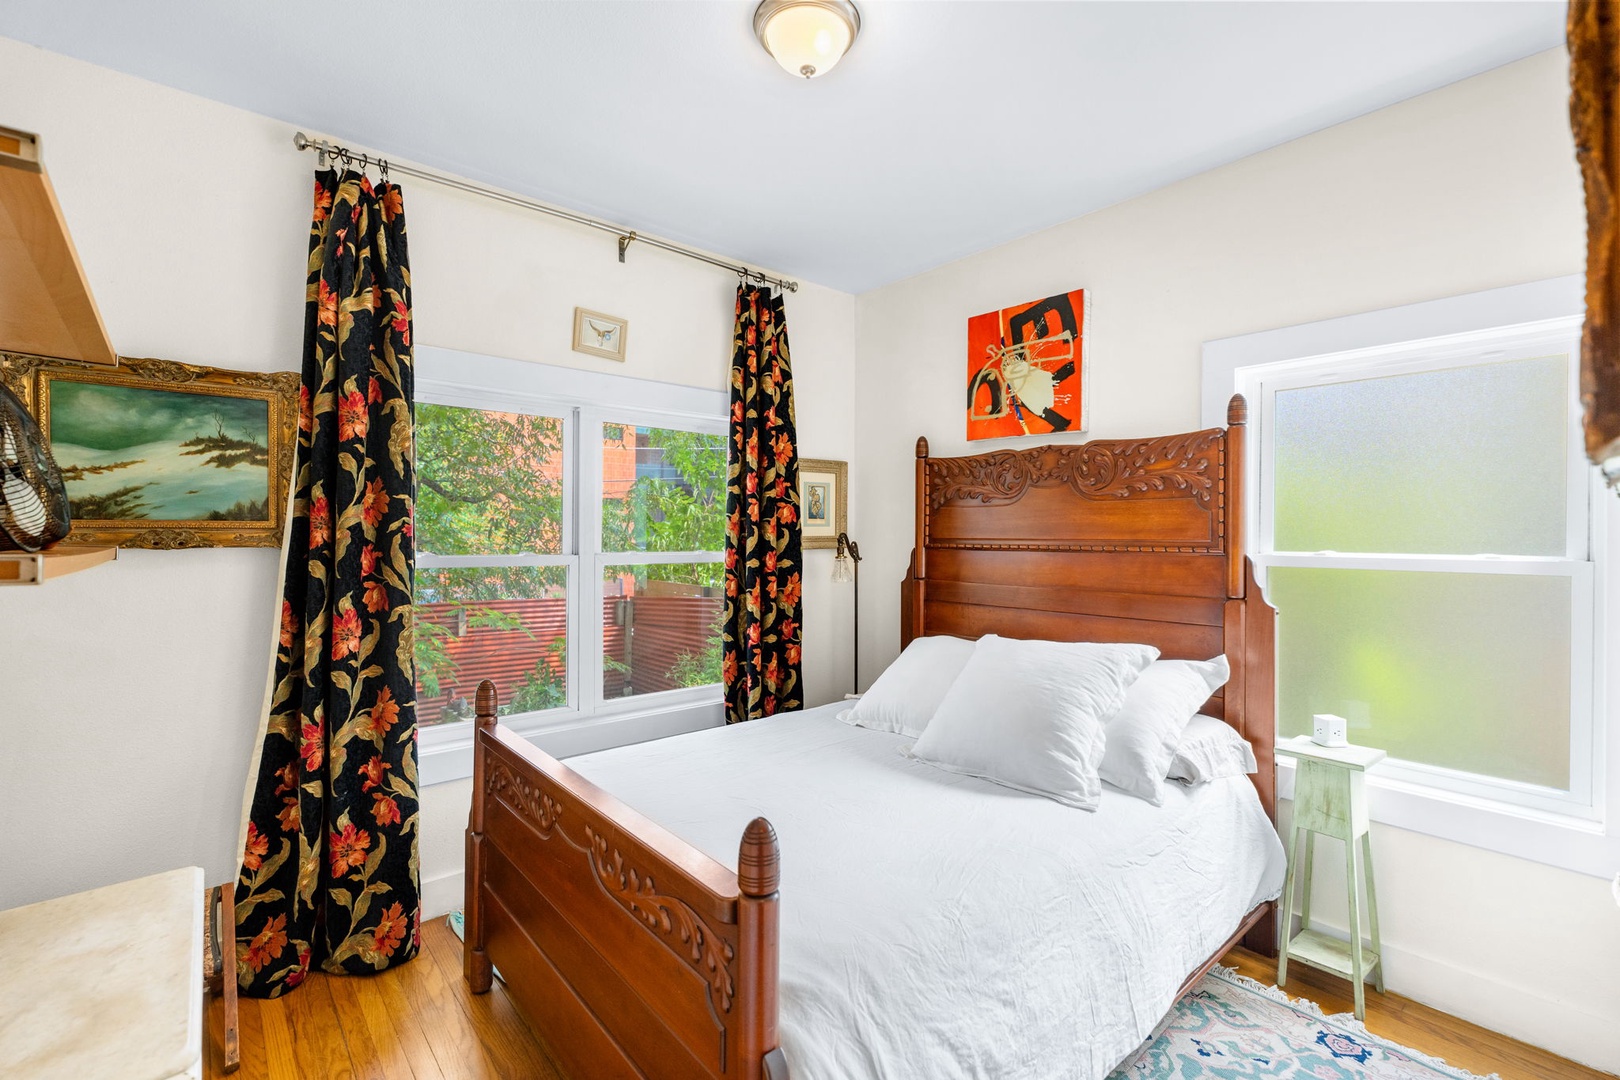 The 1st floor bedroom offers a regal full-sized bed & lots of natural light